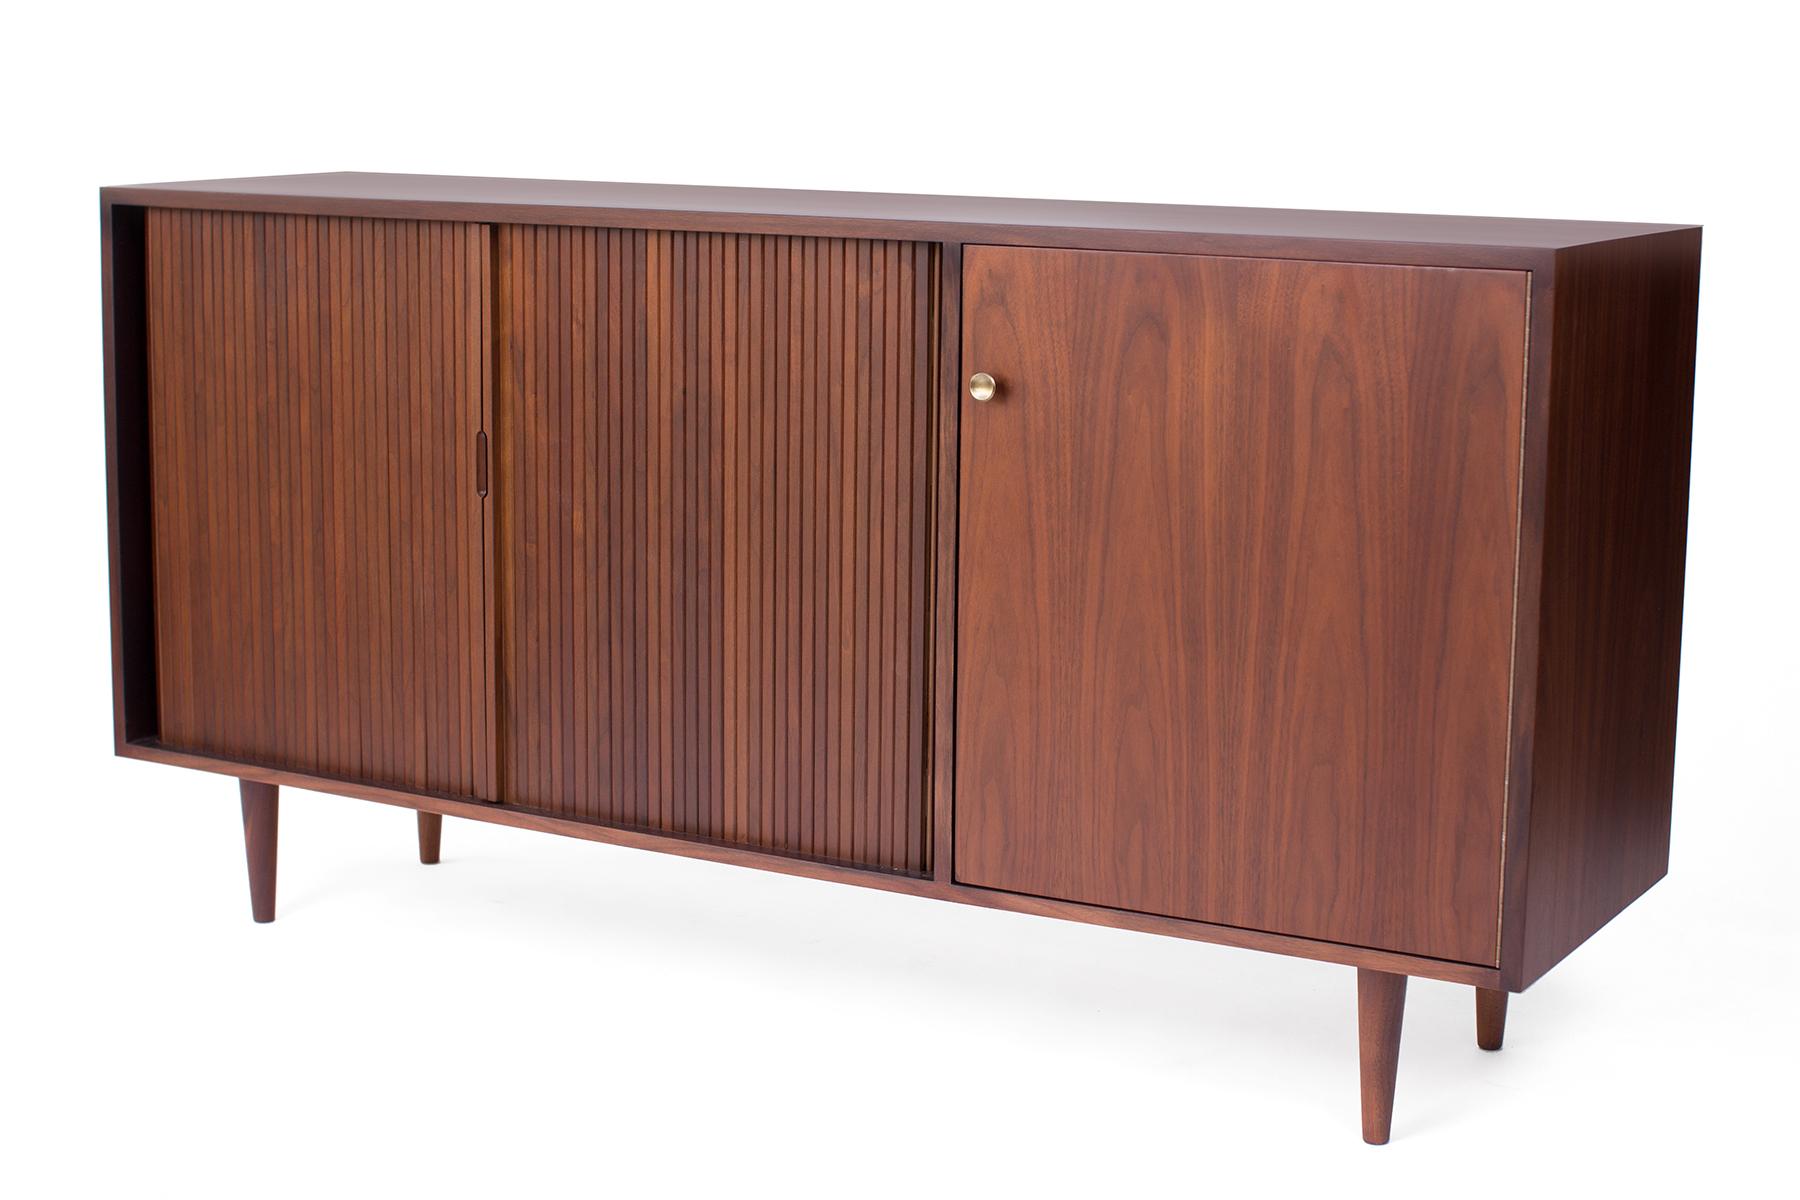 Milo Baughman for Glenn of California walnut chest, circa early 1960s. This example has a beautifully grained case with tambour doors and solid tapered walnut legs.